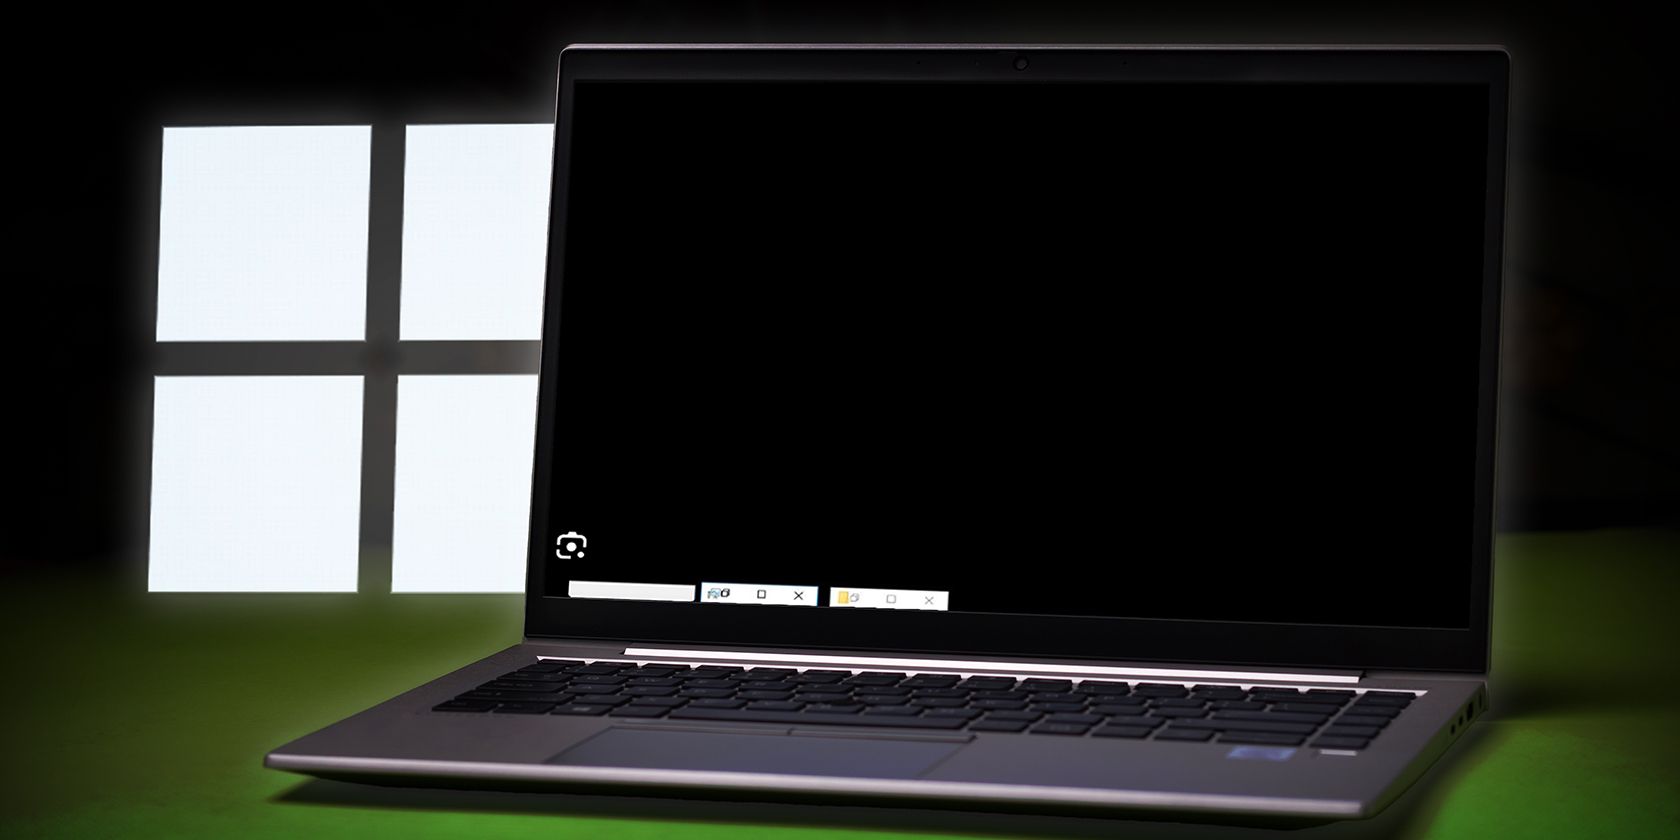 A laptop showing a blackscreen with the Windows logo on the side